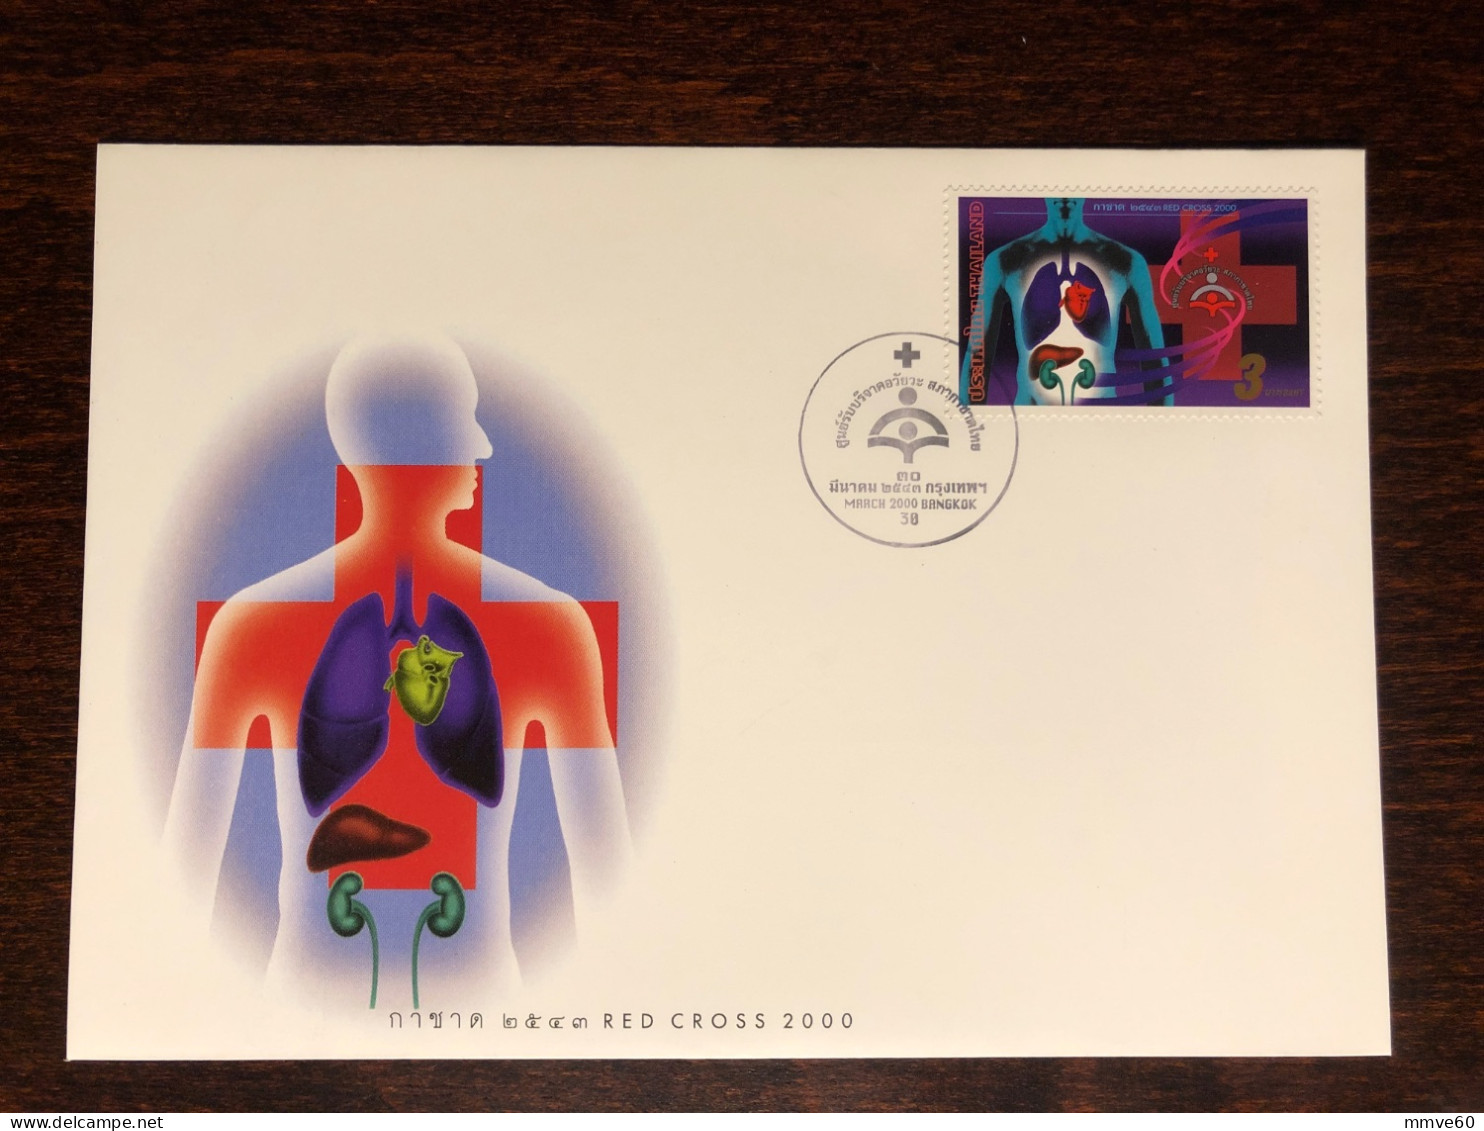 THAILAND FDC COVER 2000 YEAR ORGAN DONATION DONORS HEALTH MEDICINE STAMPS - Thaïlande